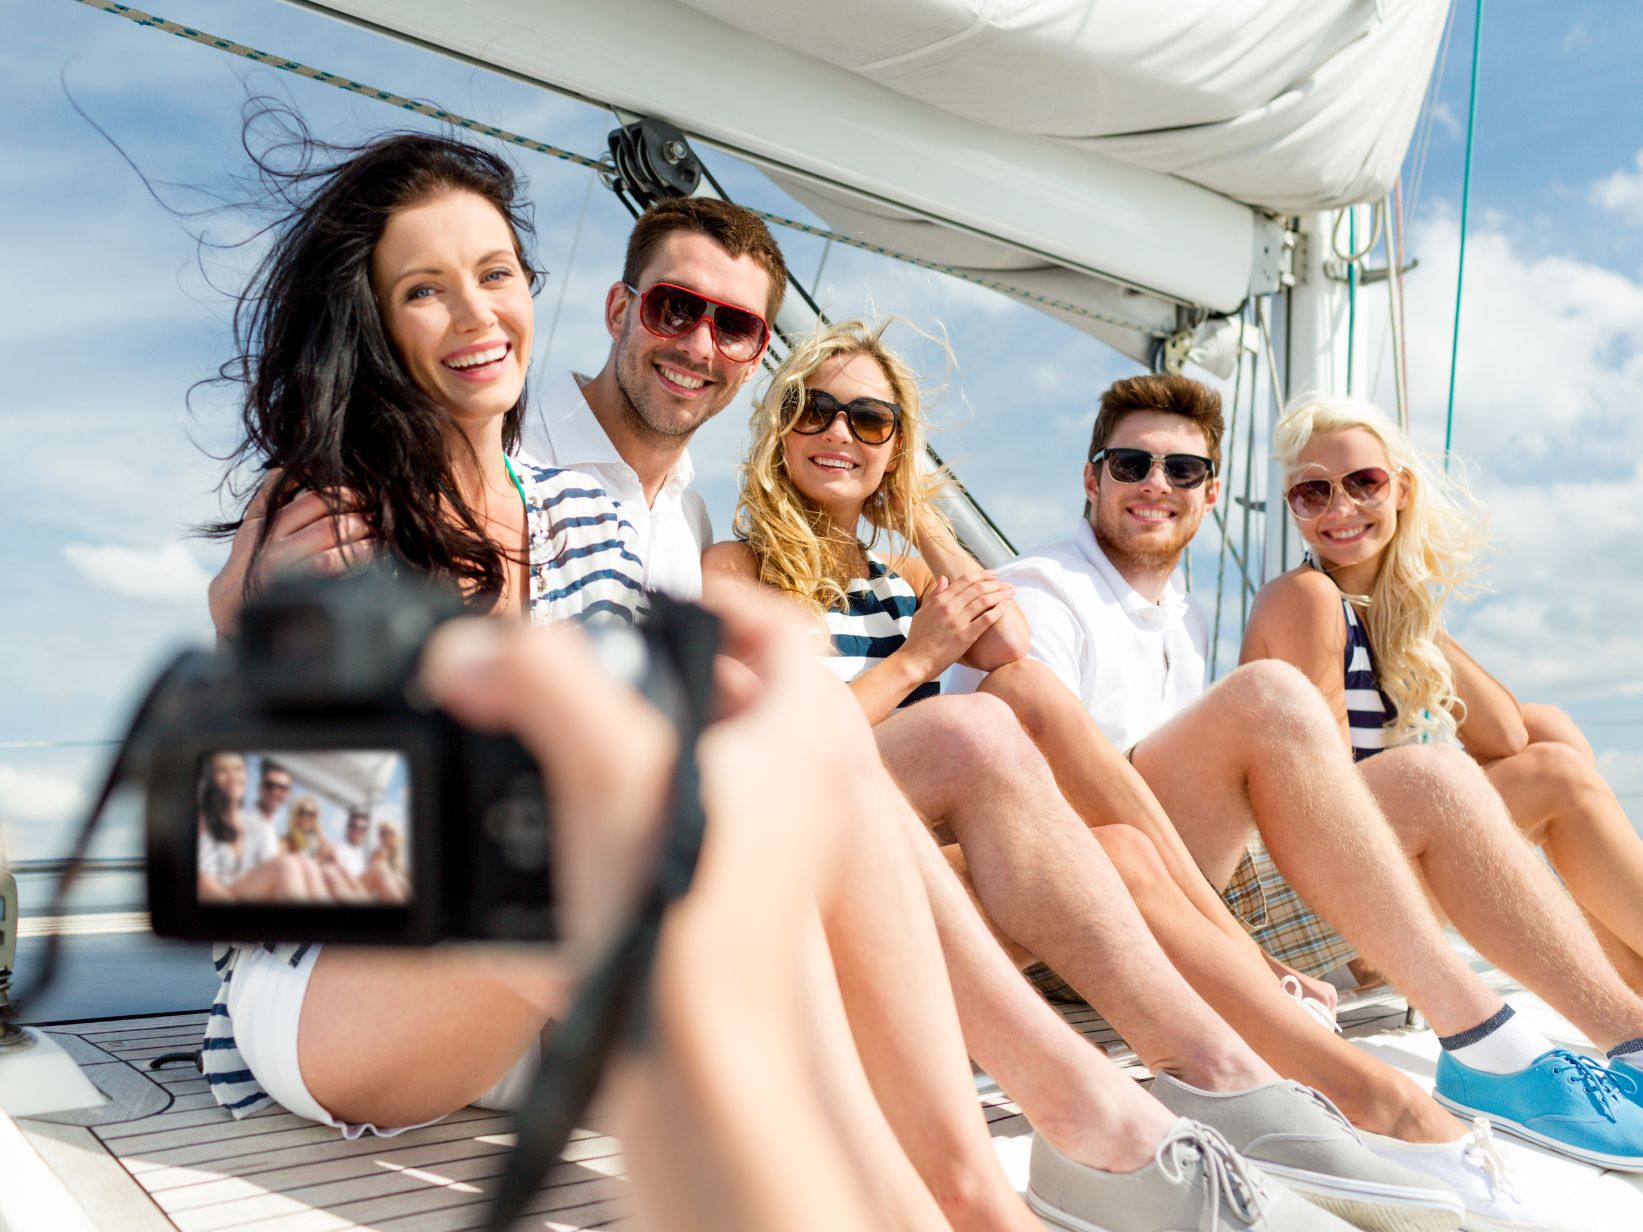 A camera capturing a group of people seated on a boat, enjoying the view and camaraderie.